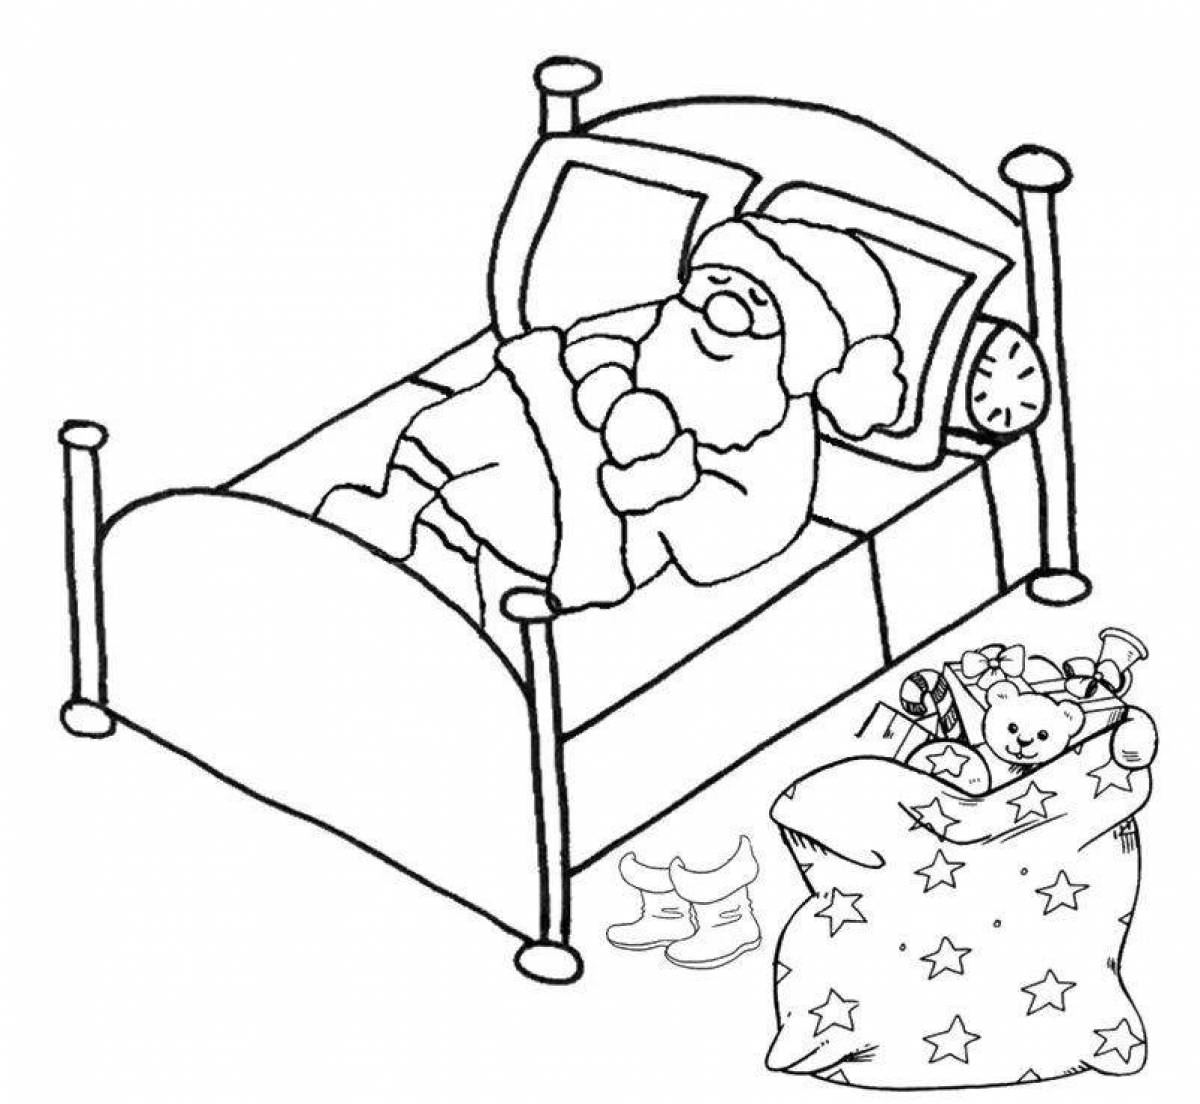 Coloring page adorable doll with bed